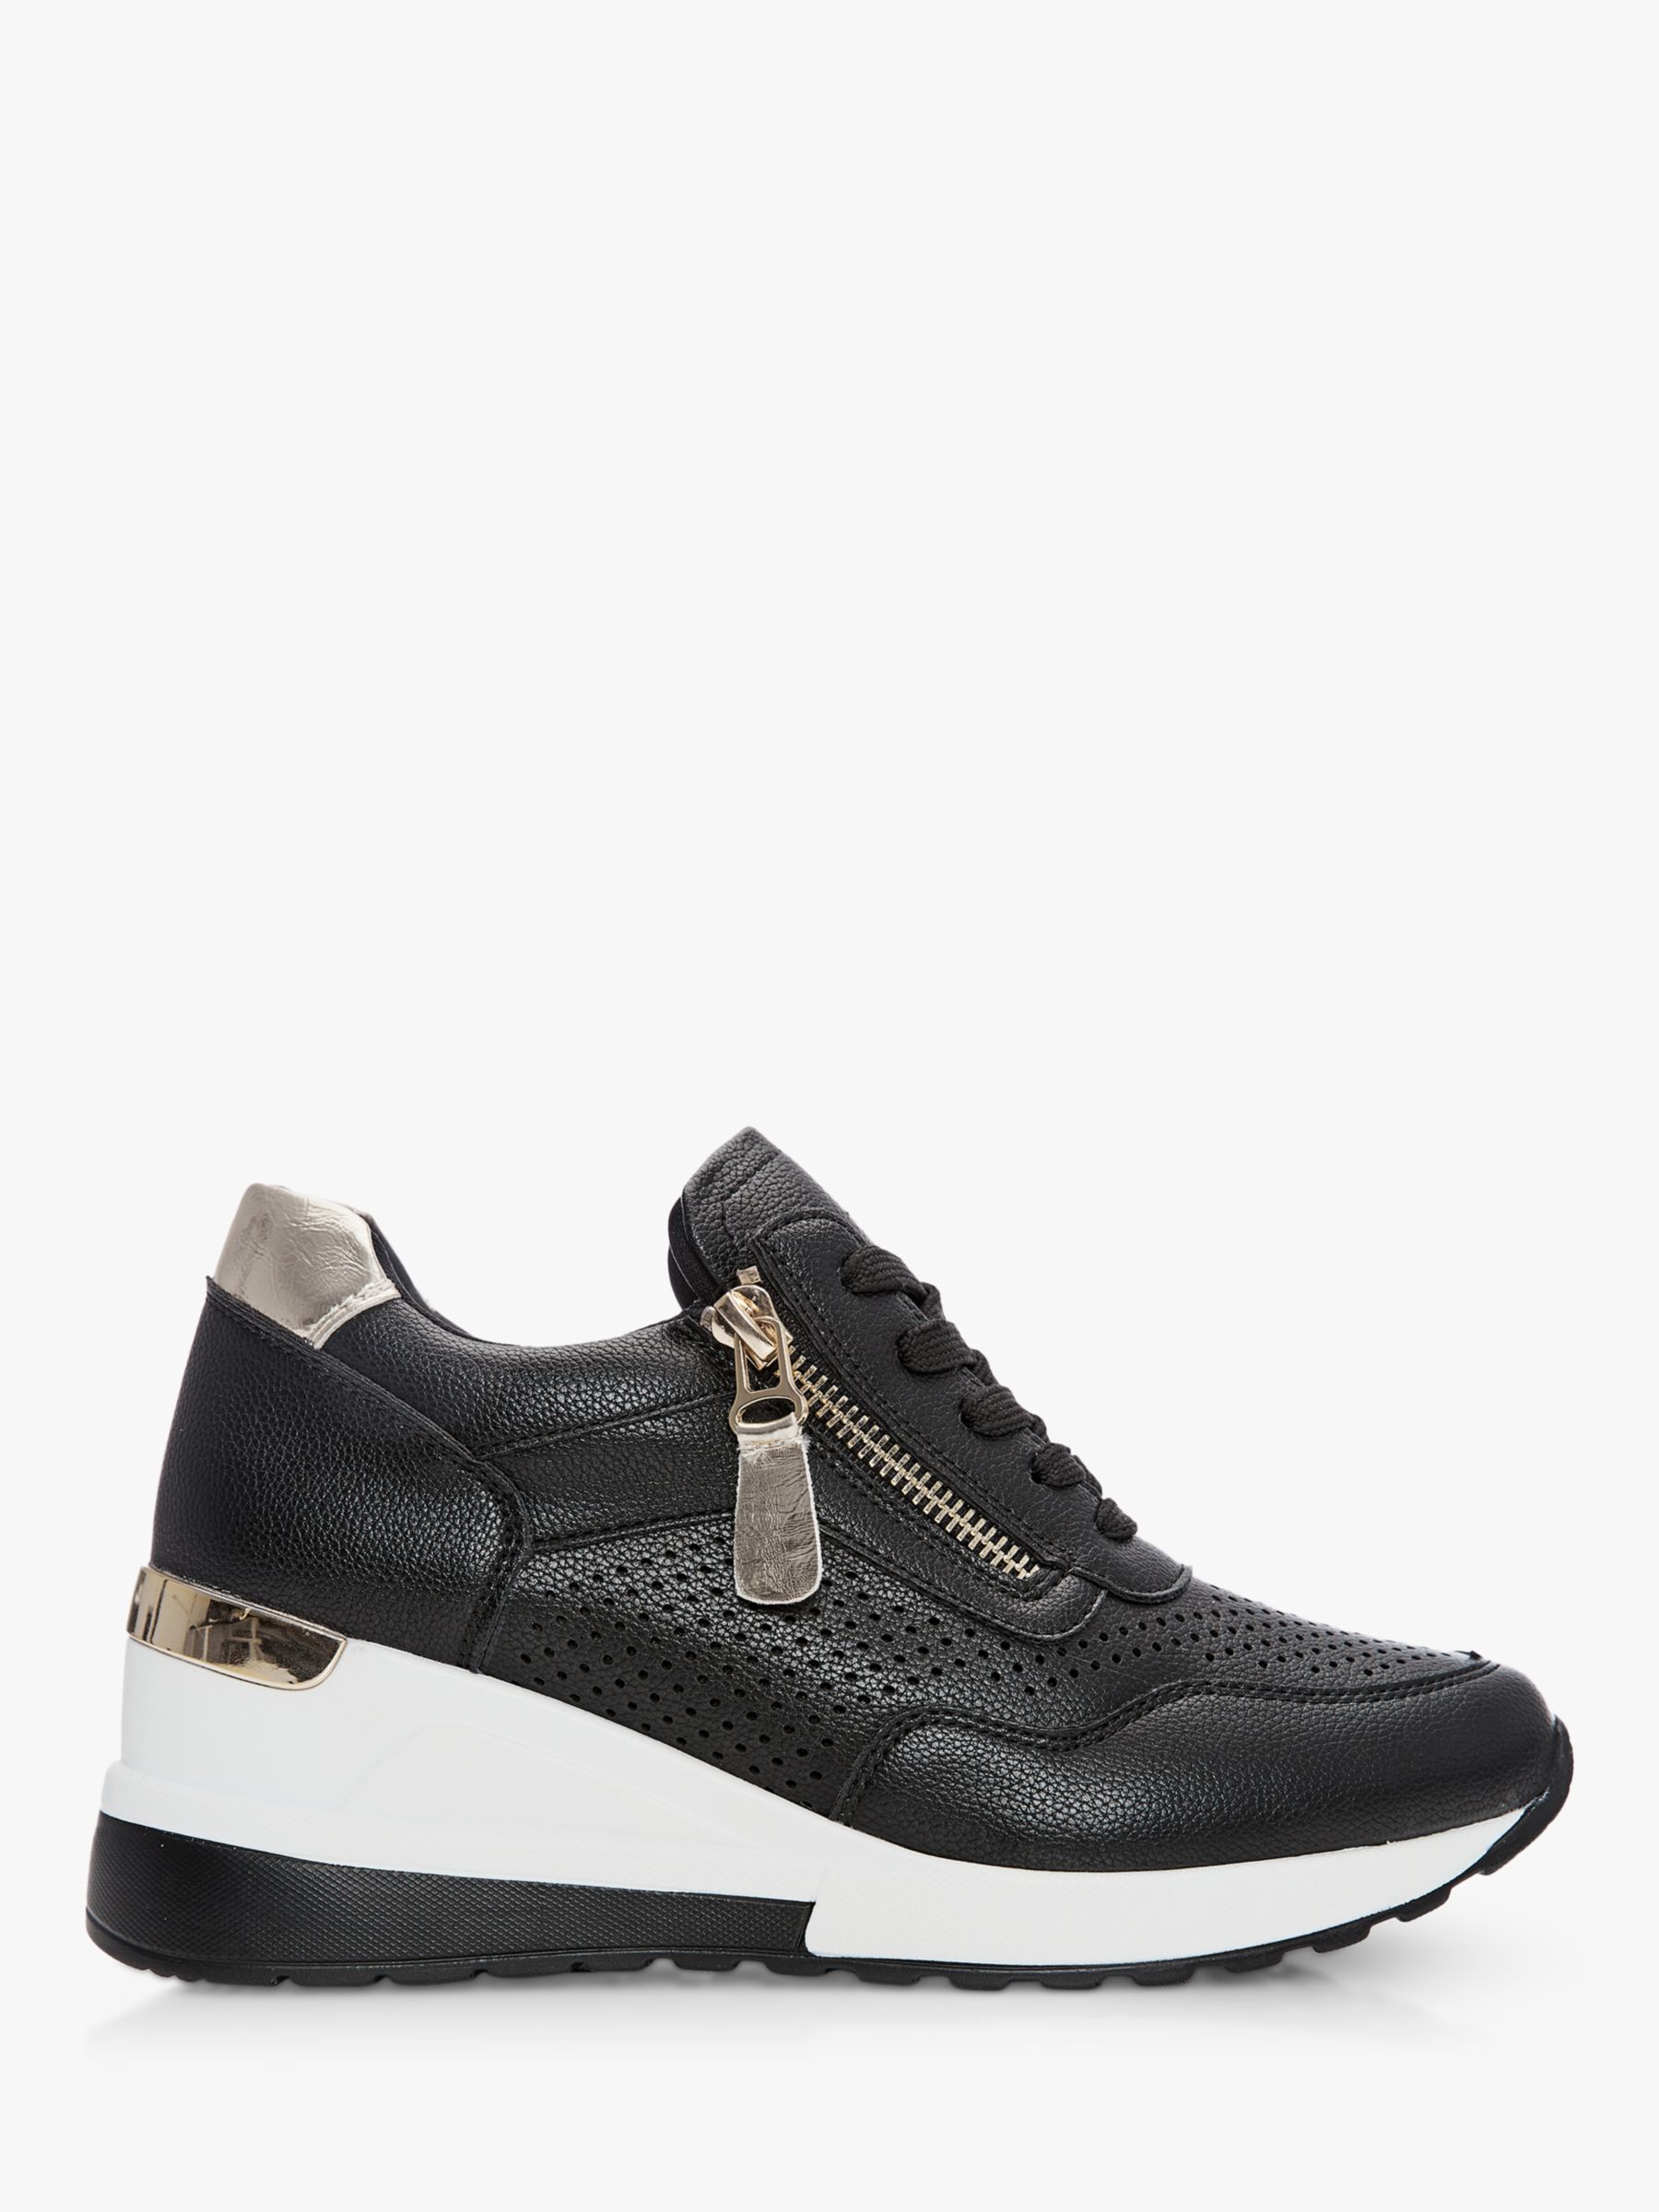 Moda in Pelle Bonnia Leather Wedge Sole Trainers, Black at John Lewis ...